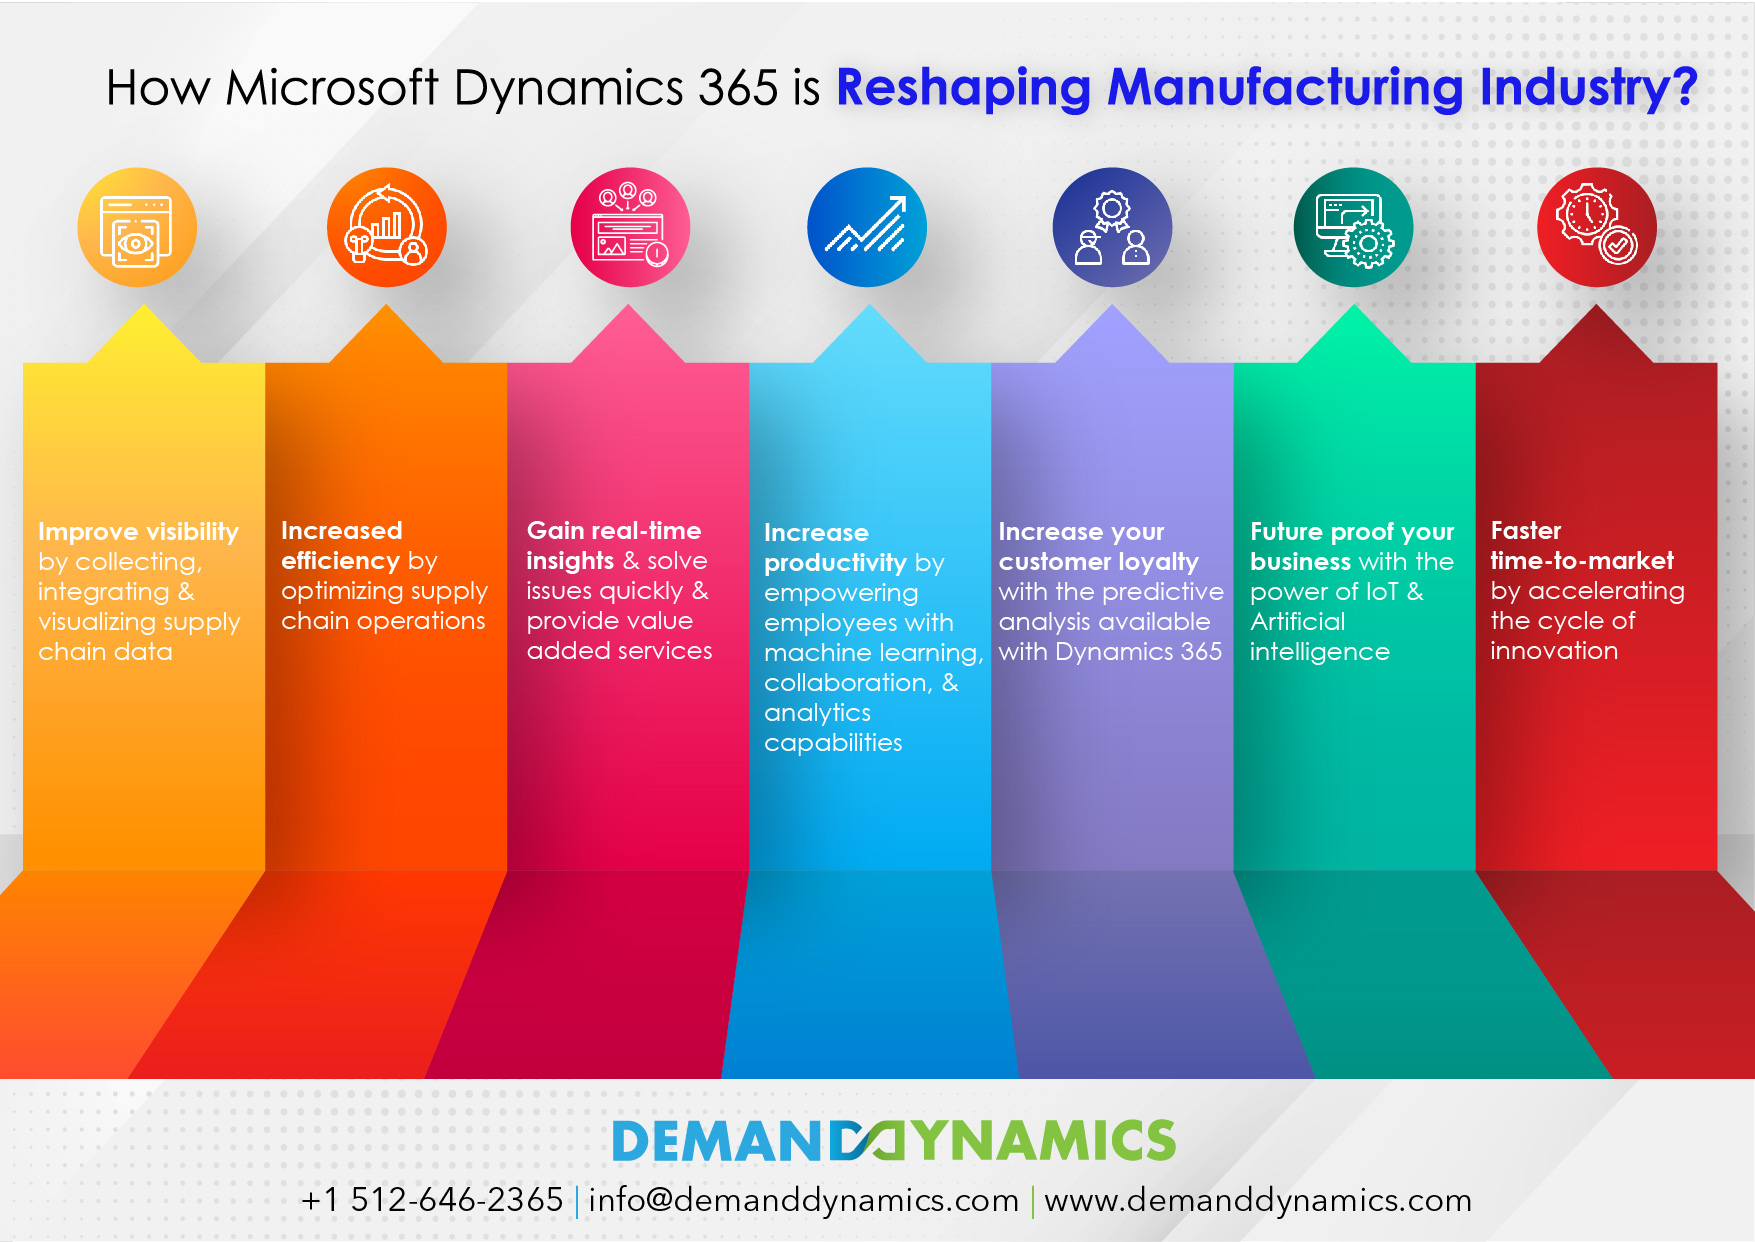 Dynamics 365 in Manufacturing Industry